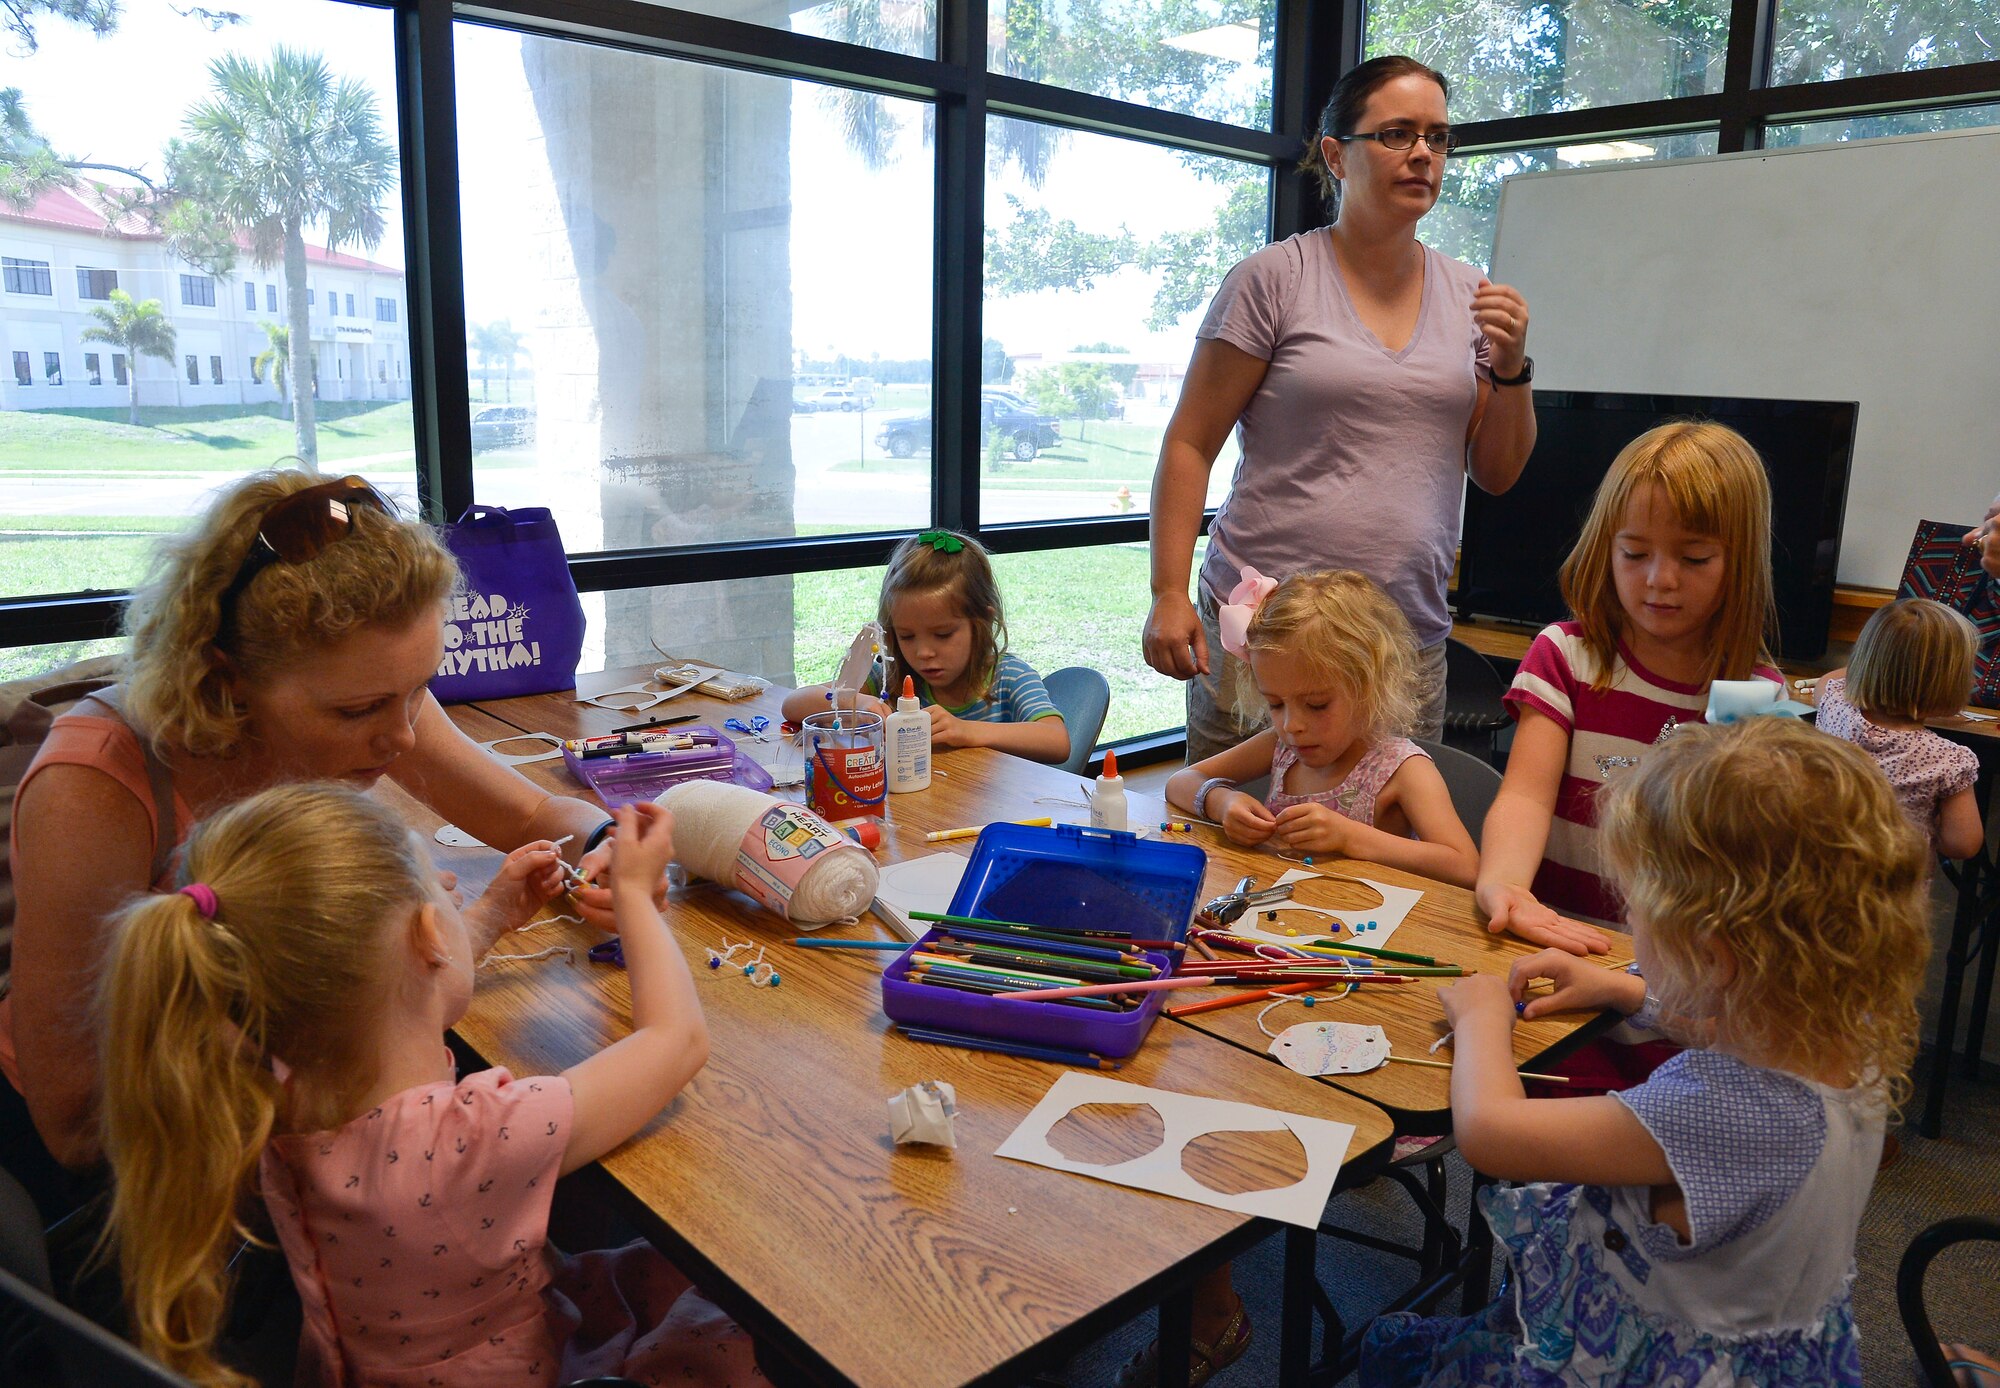 Members of Team MacDill and their children build crafts during the Children’s Summer Reading Program kick-off in the base library at MacDill Air Force Base, Fla., June 9, 2015. The kick-off consisted of arts and crafts, games, prizes and reading. (U.S. Air Force photo by Staff Sgt. Shandresha Mitchell/Released)